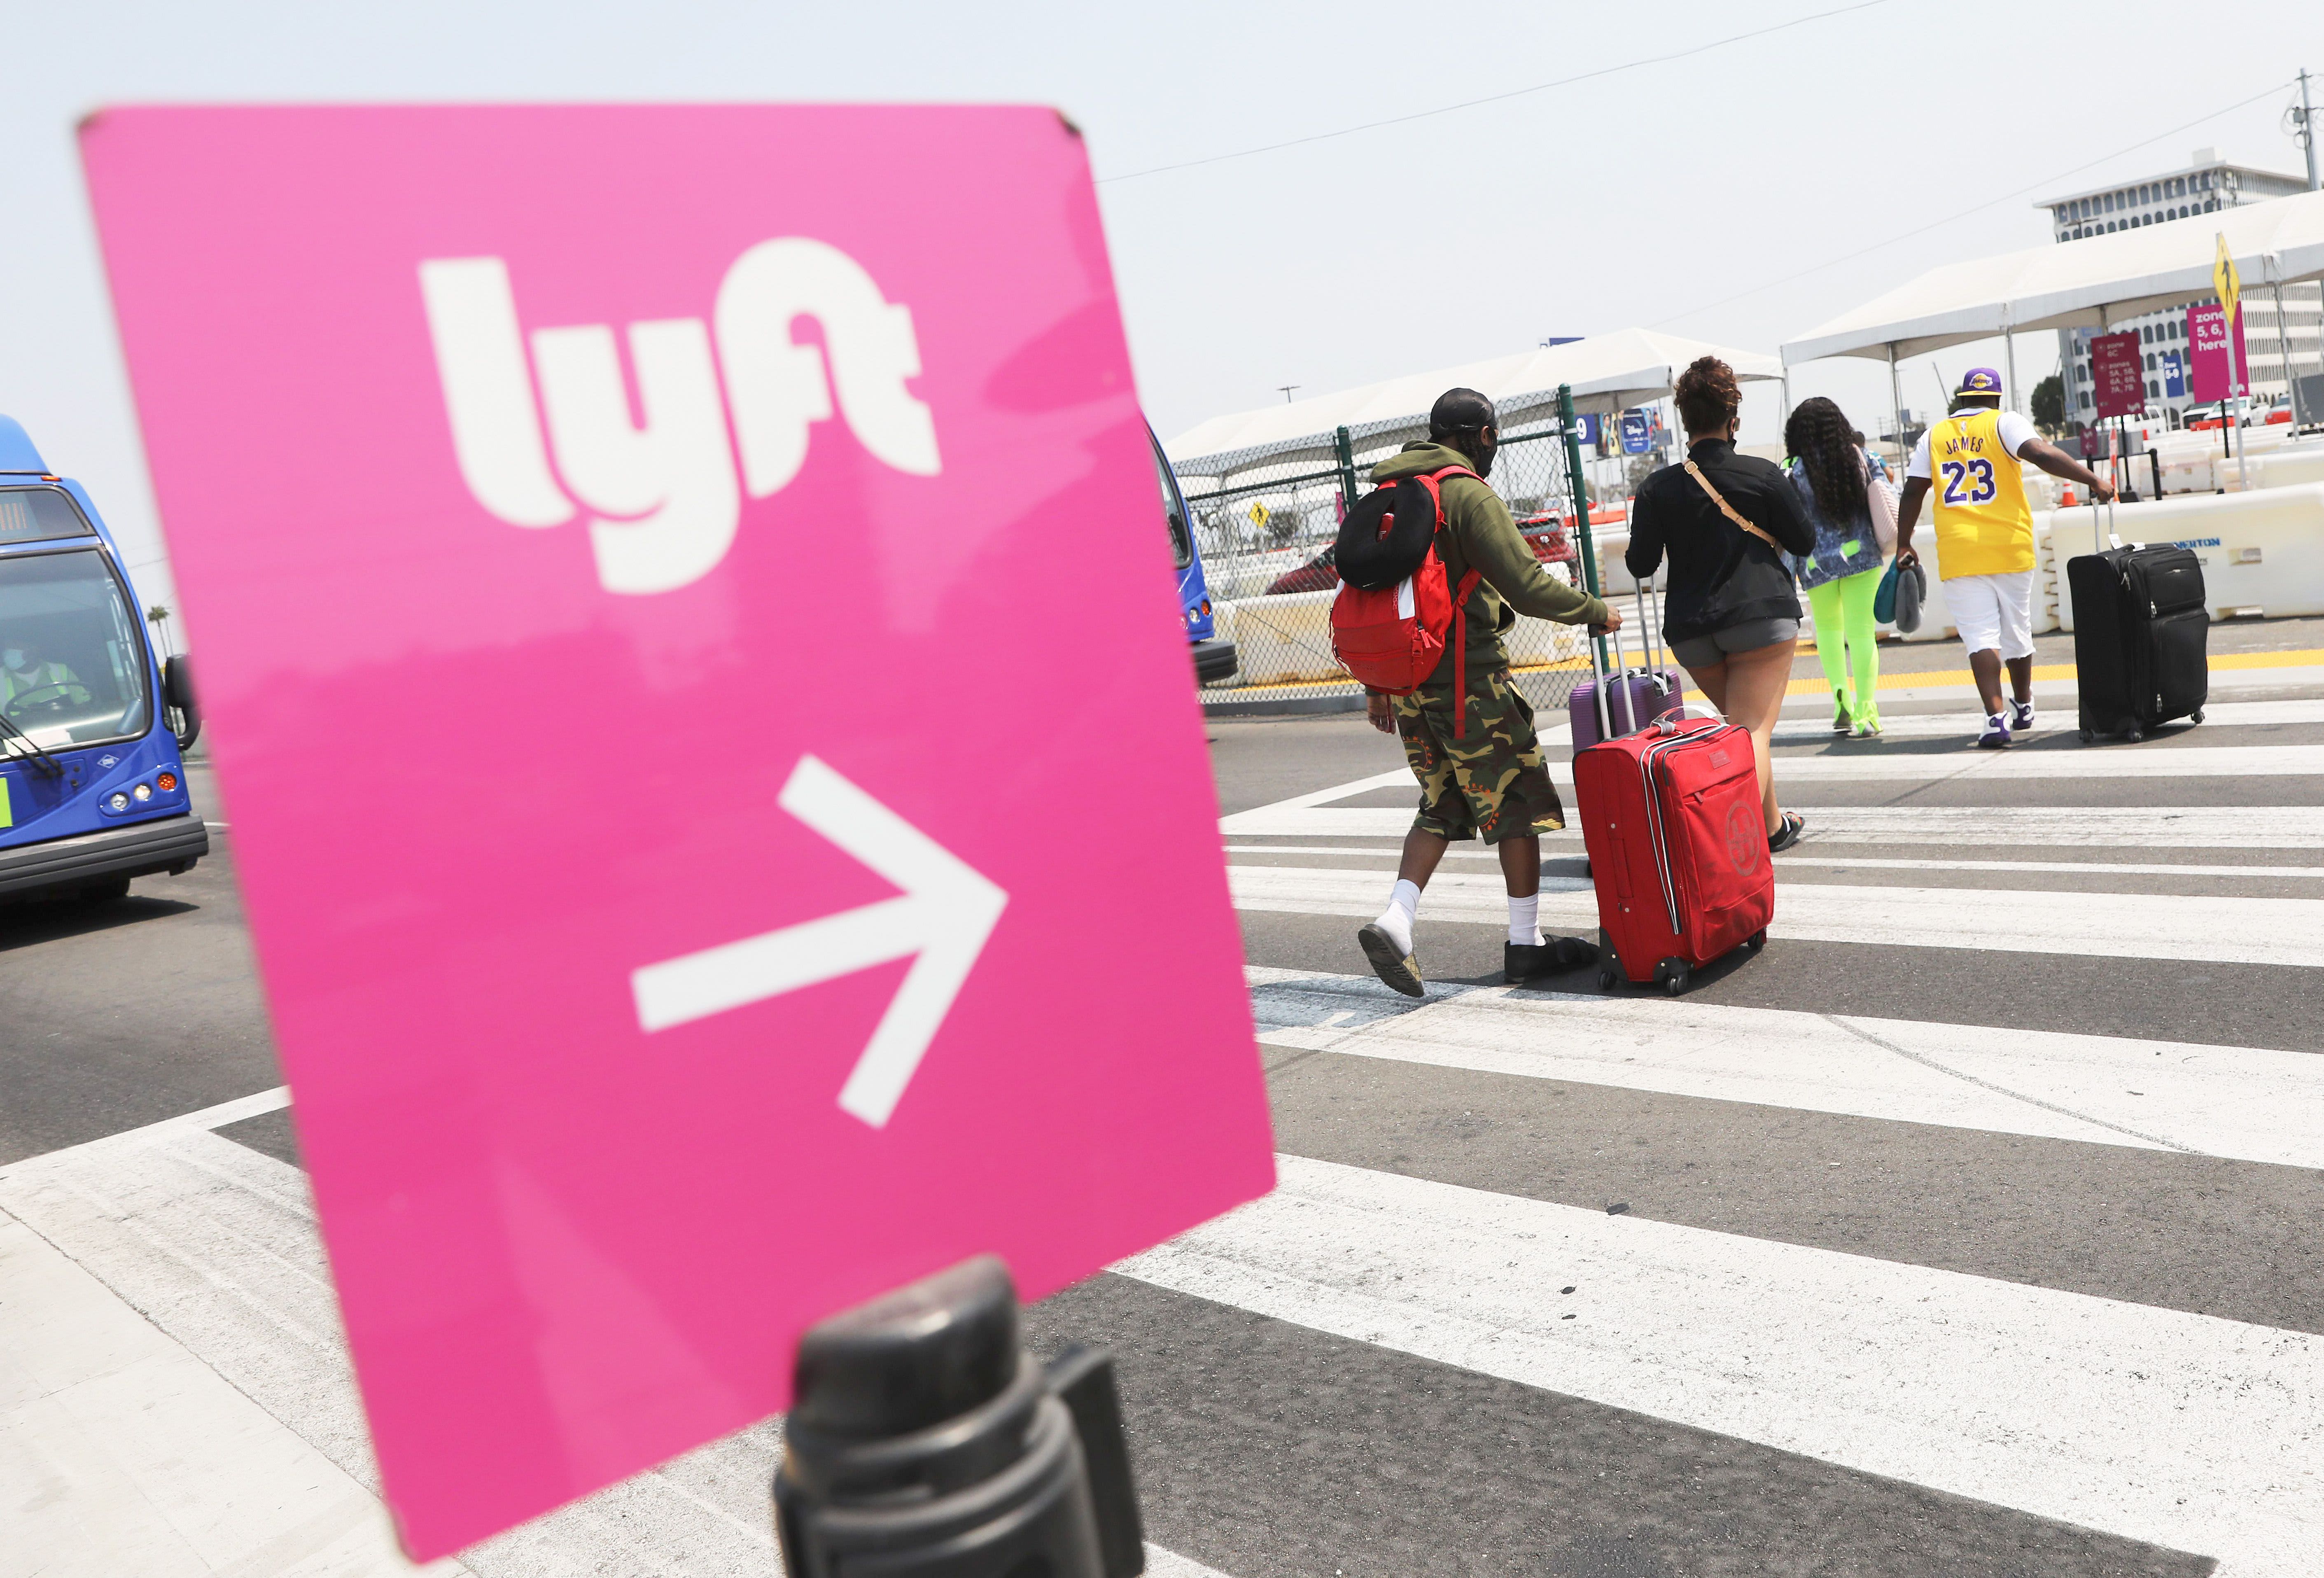 Lyft says it has had the most weekly riders since the beginning of the pandemic